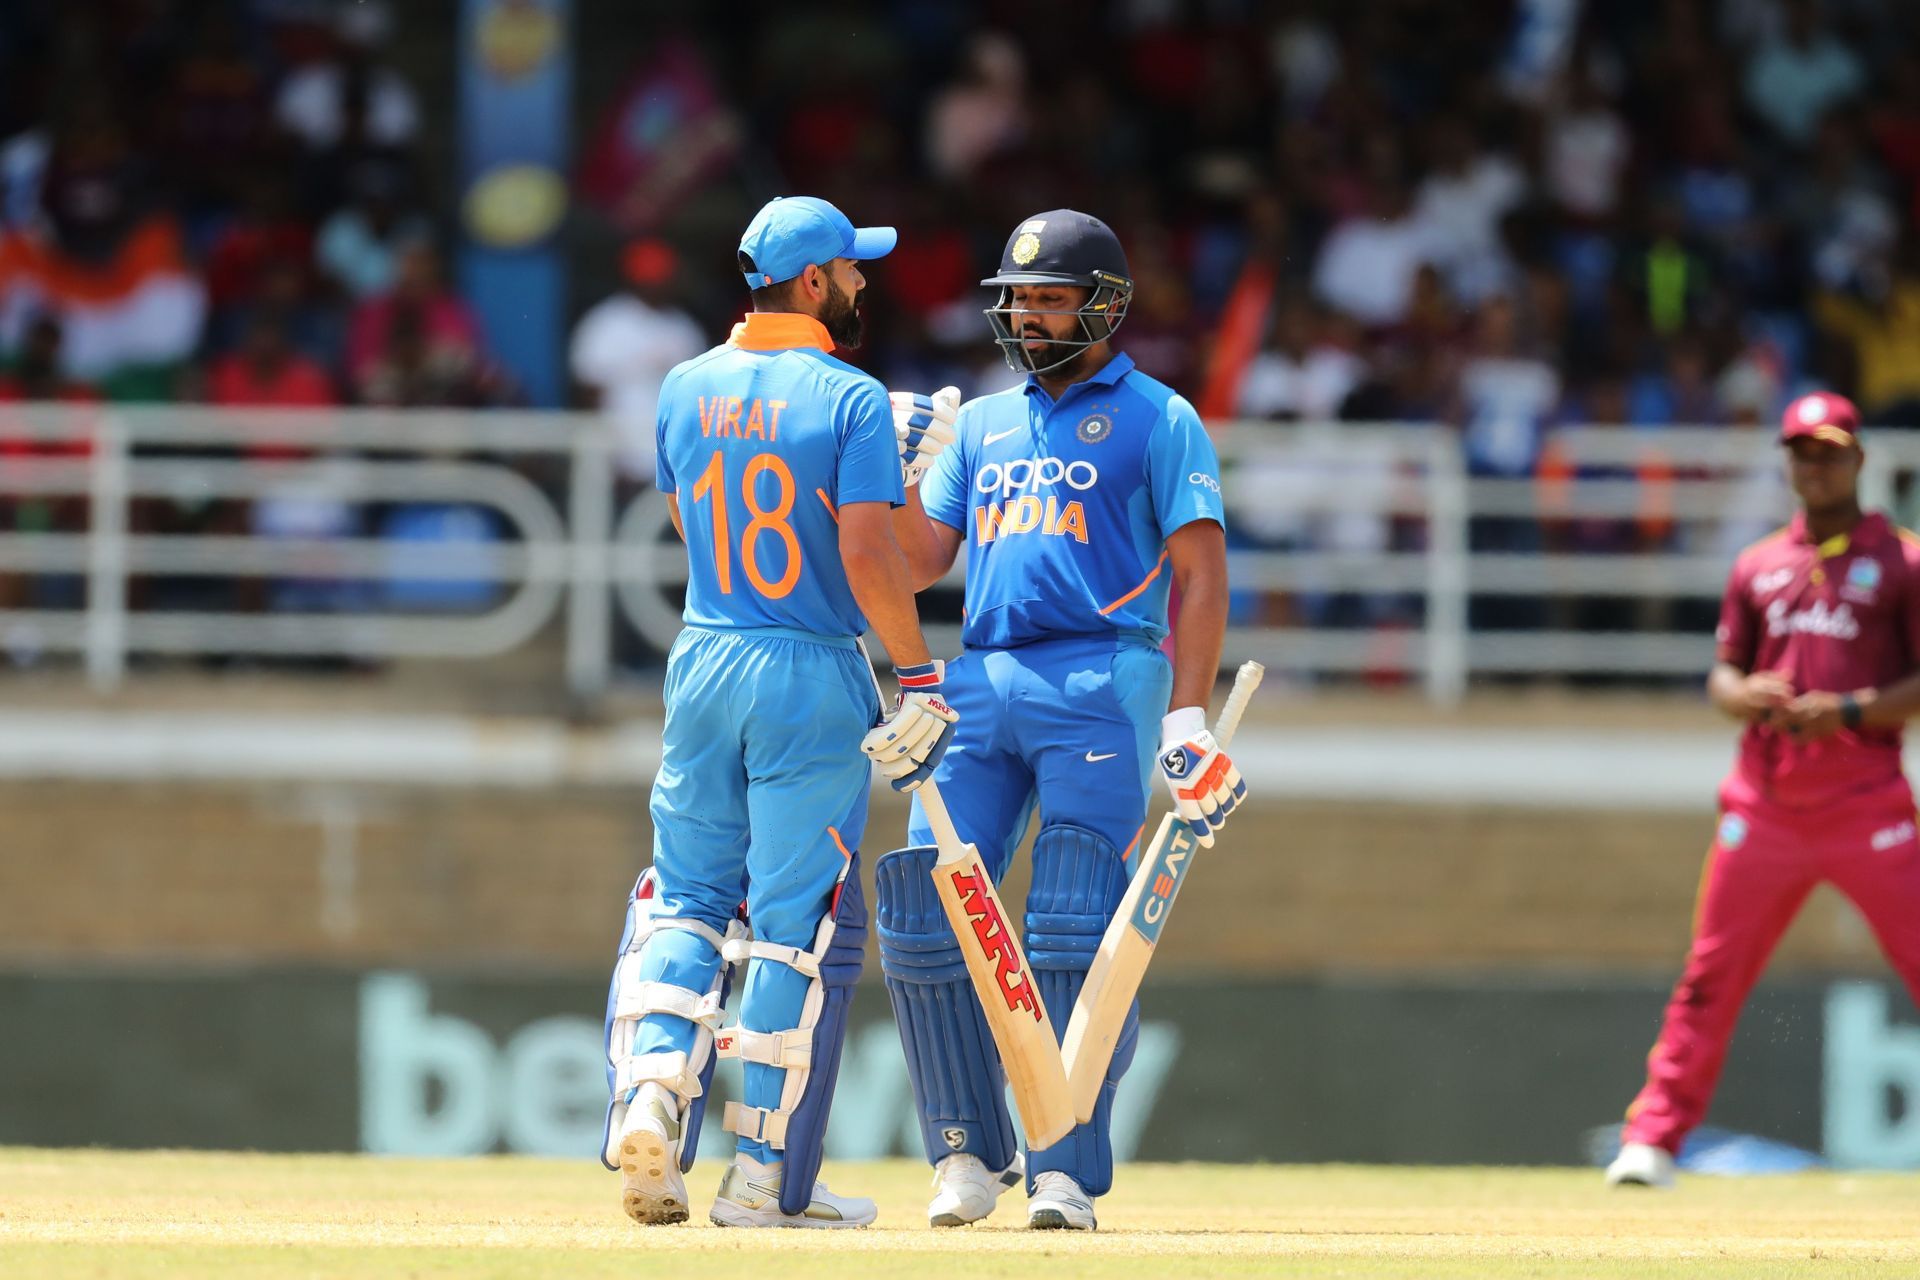 Rohit Sharma will lead Team India in the ODI series against the West Indies